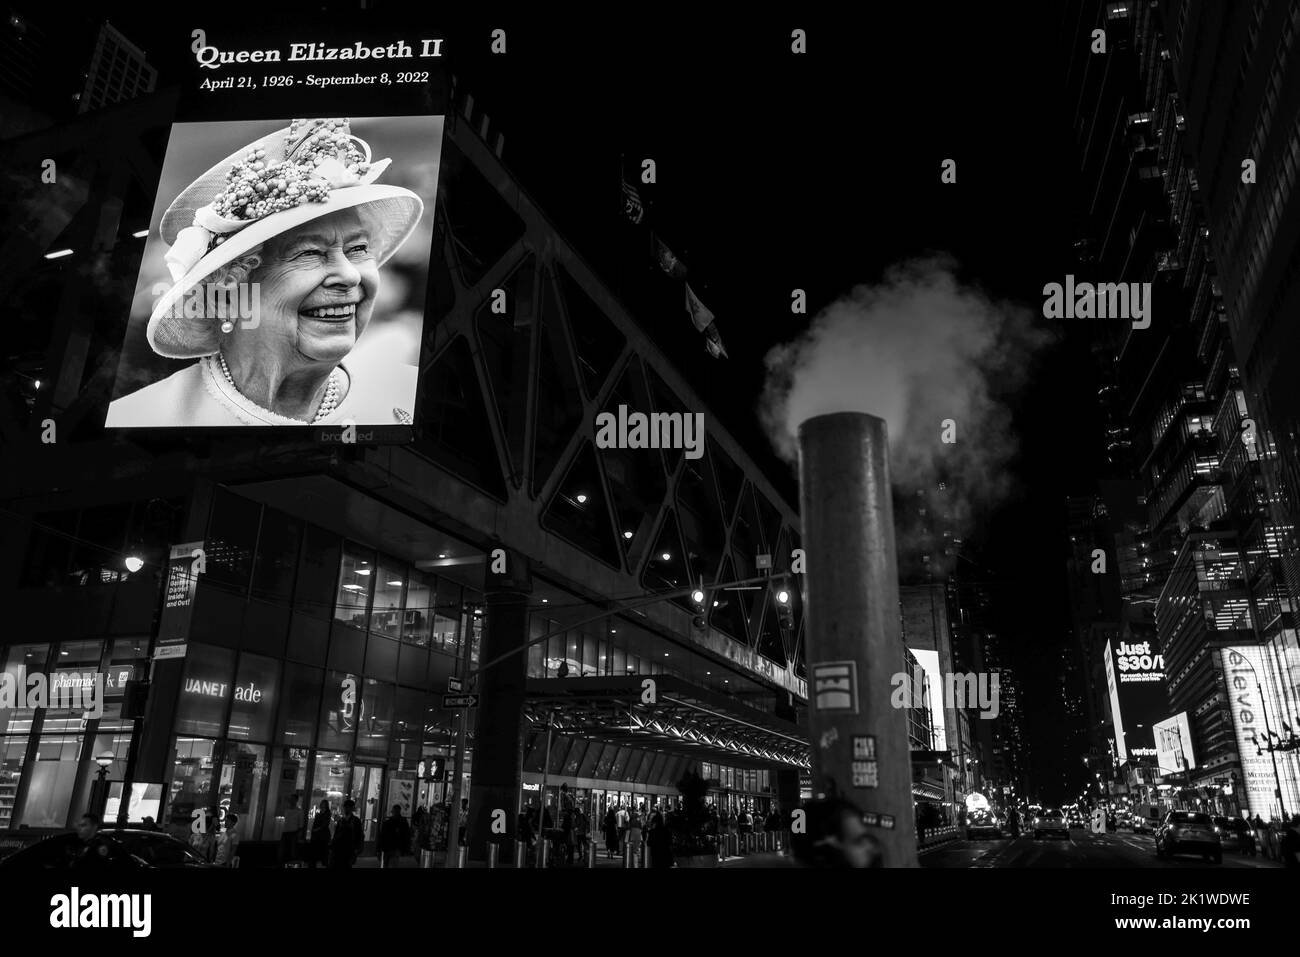 A magnificent memorial displayed on Time Square's jumbotrons to inform New York City of Queen Elizabeth II's passing. Stock Photo